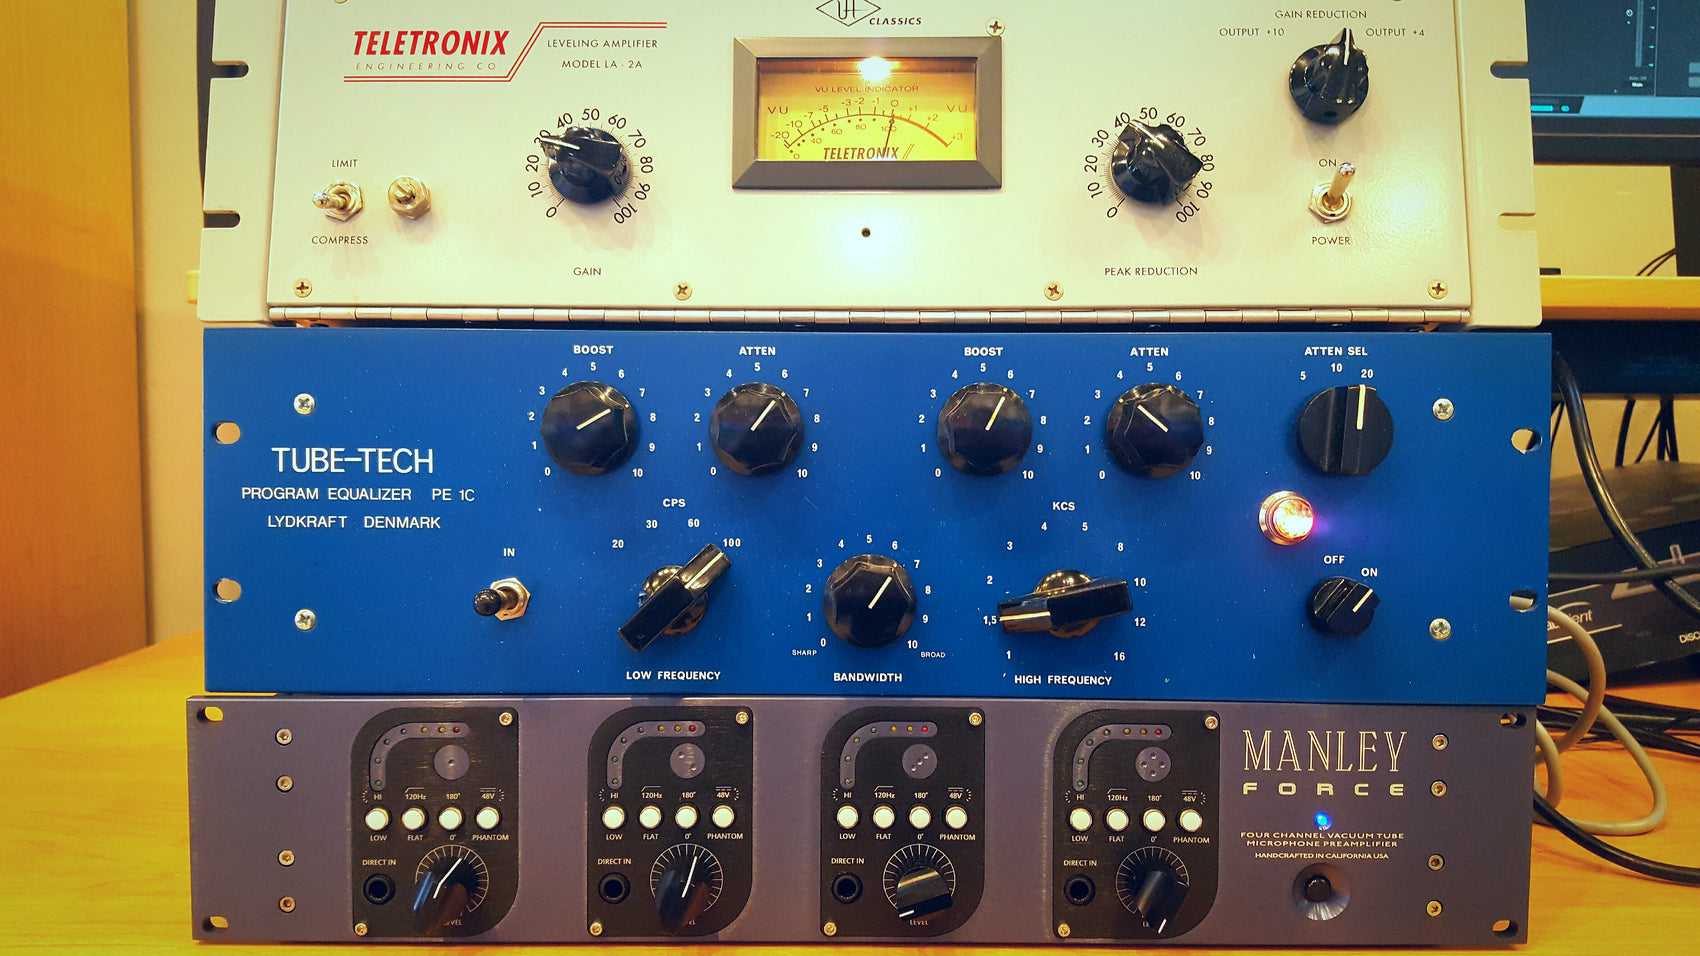 Tracking with Manley Force, Tube-Tech PE 1C and Teletronix LA-2A (UA Reissue)